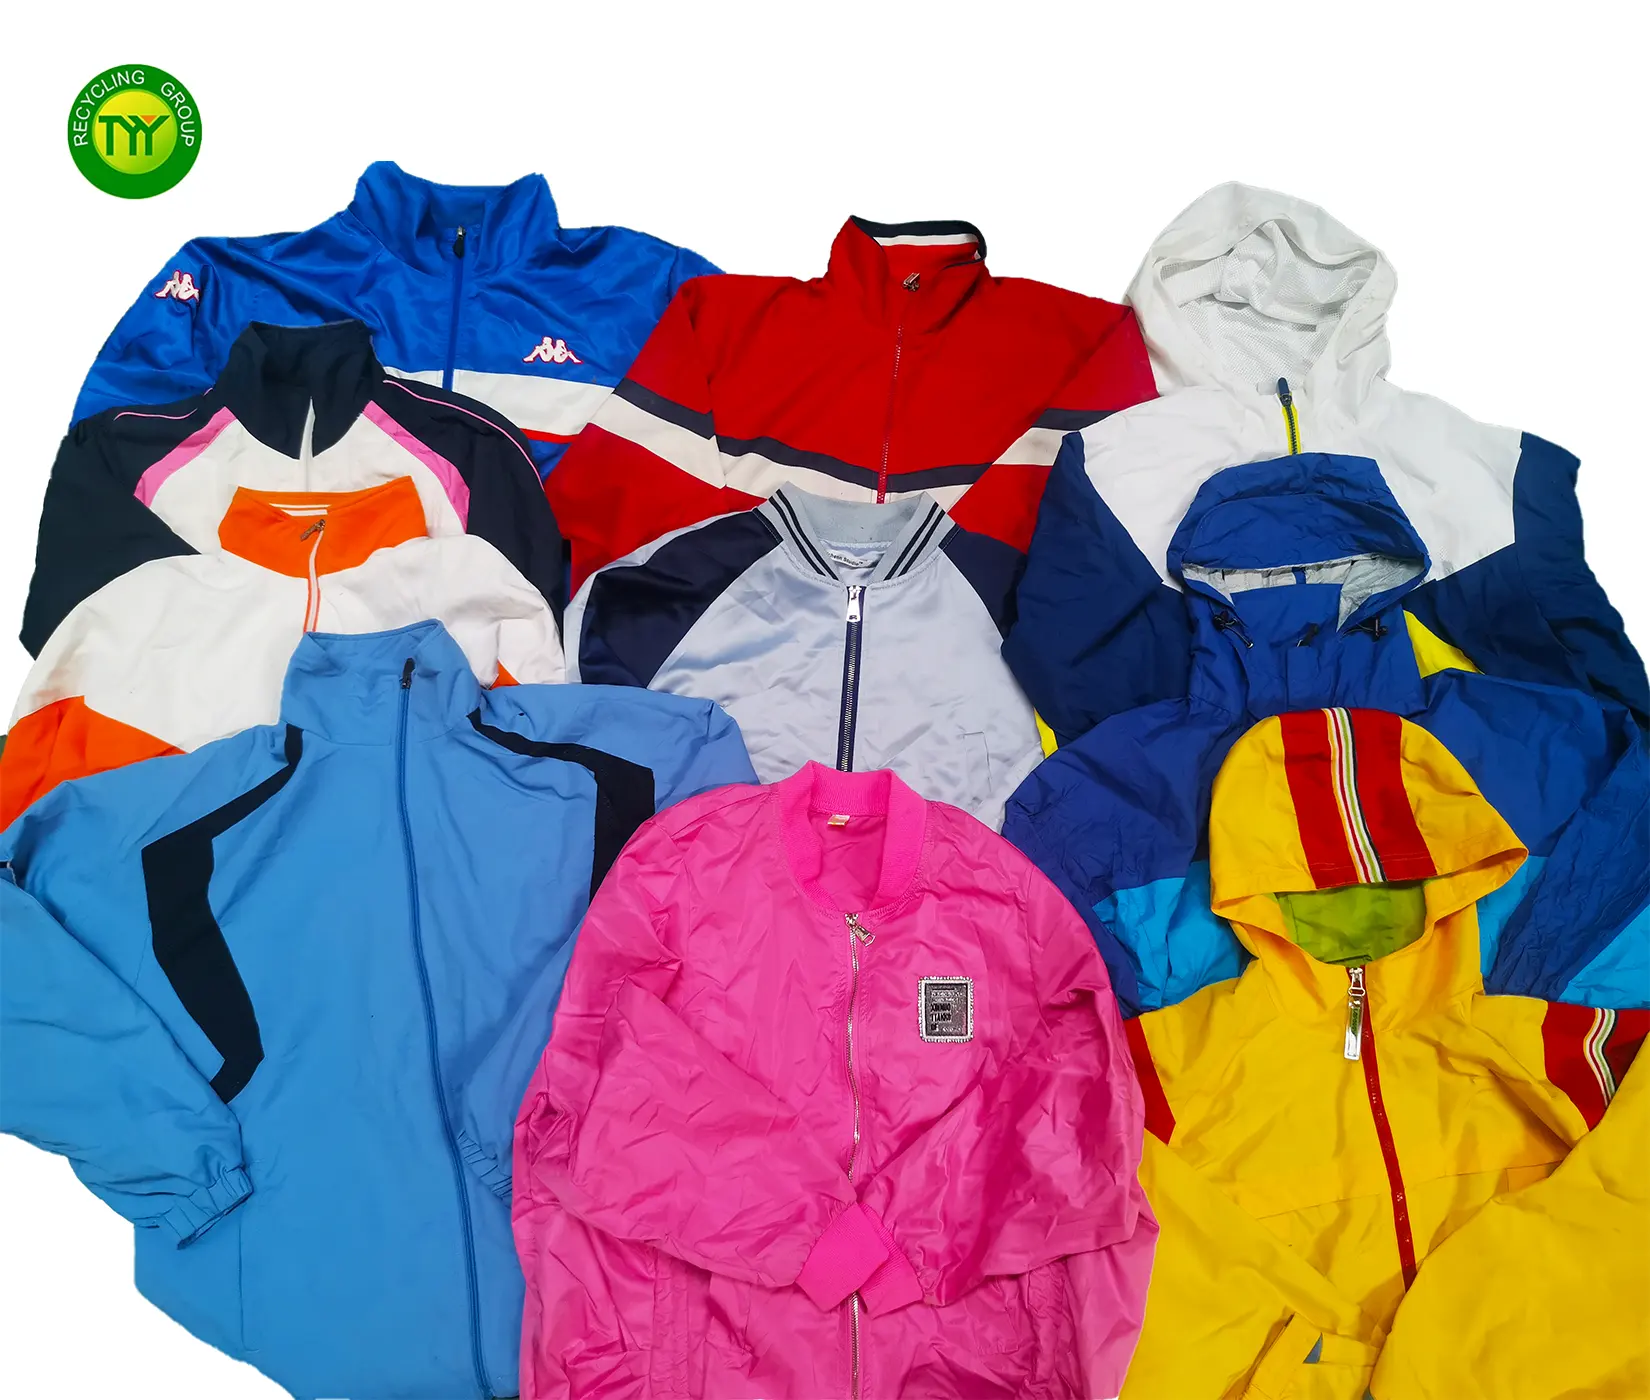 used Sport Wear Bales Track Sport Wear bales clothes branded Used Clothing For Unisex Bale 100Kg Mixed Used Clothes Sports Wear